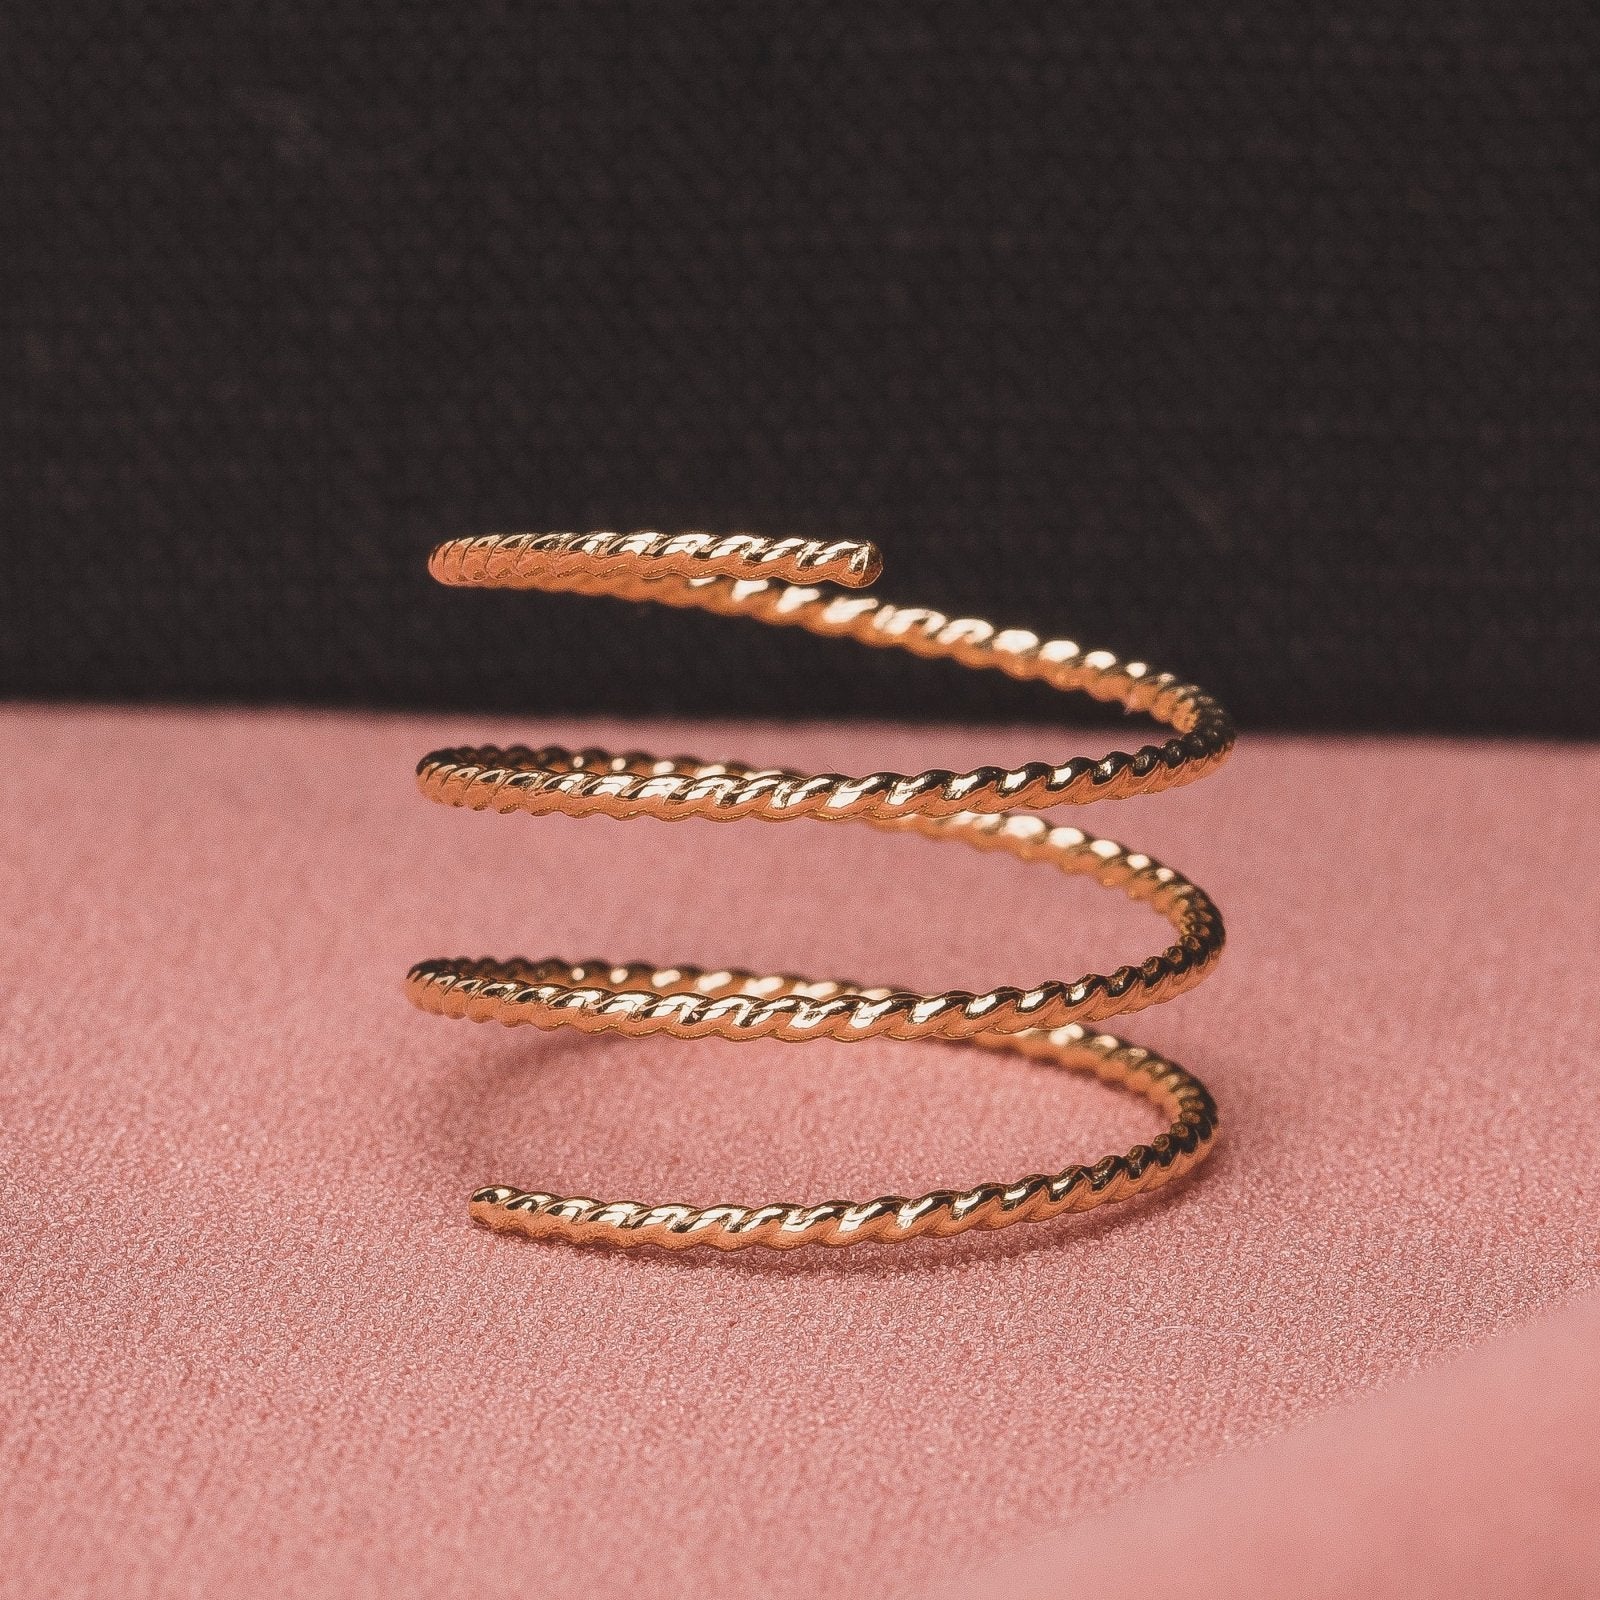 Twisted Double Spiral Ring - Melanie Golden Jewelry - ring, ring band, silver